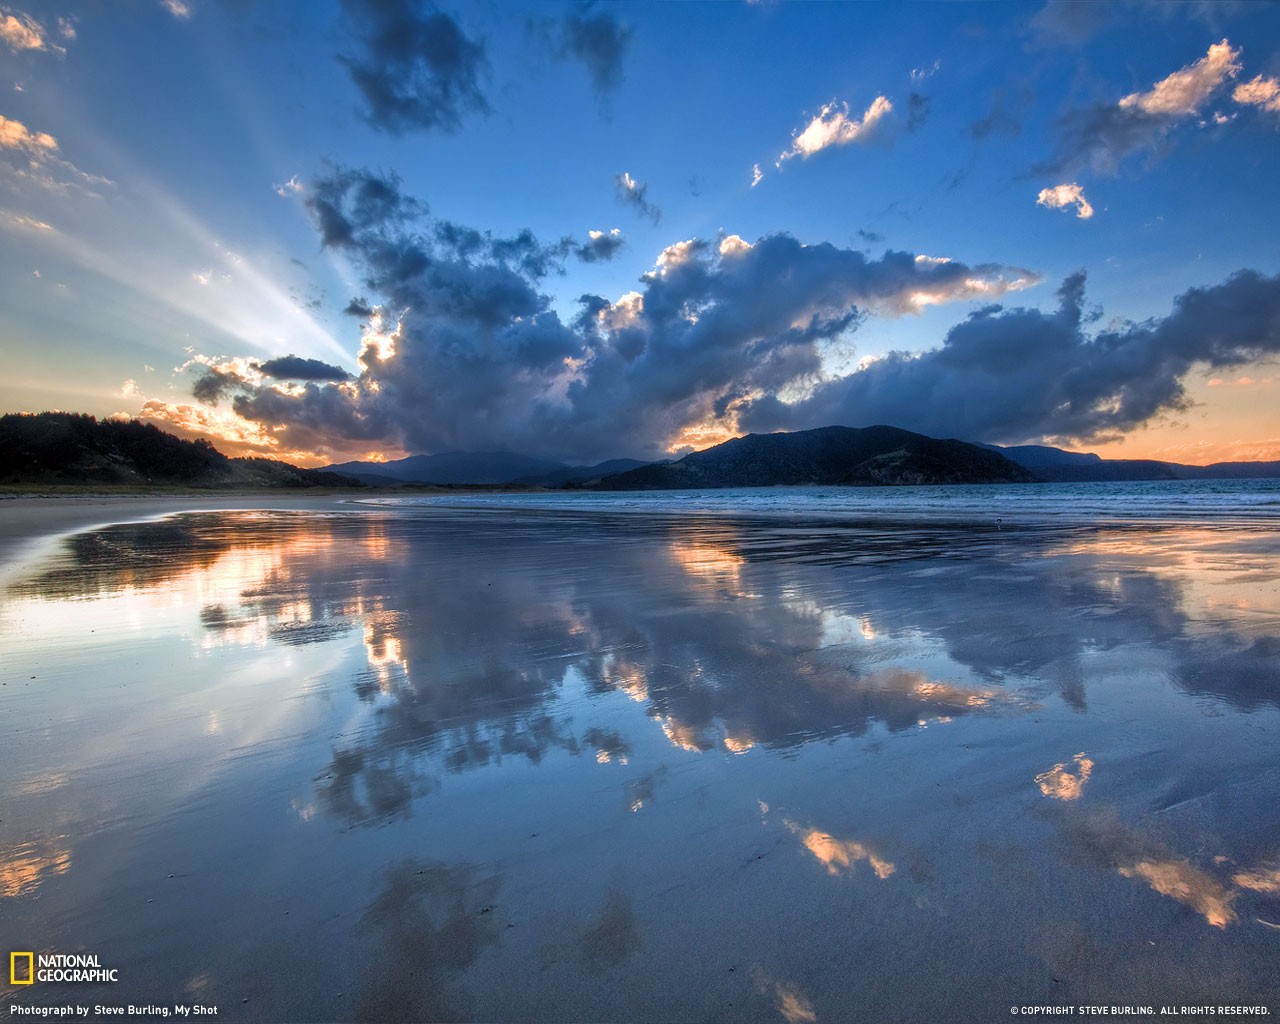 General 1280x1024 National Geographic nature sky reflection clouds coast outdoors